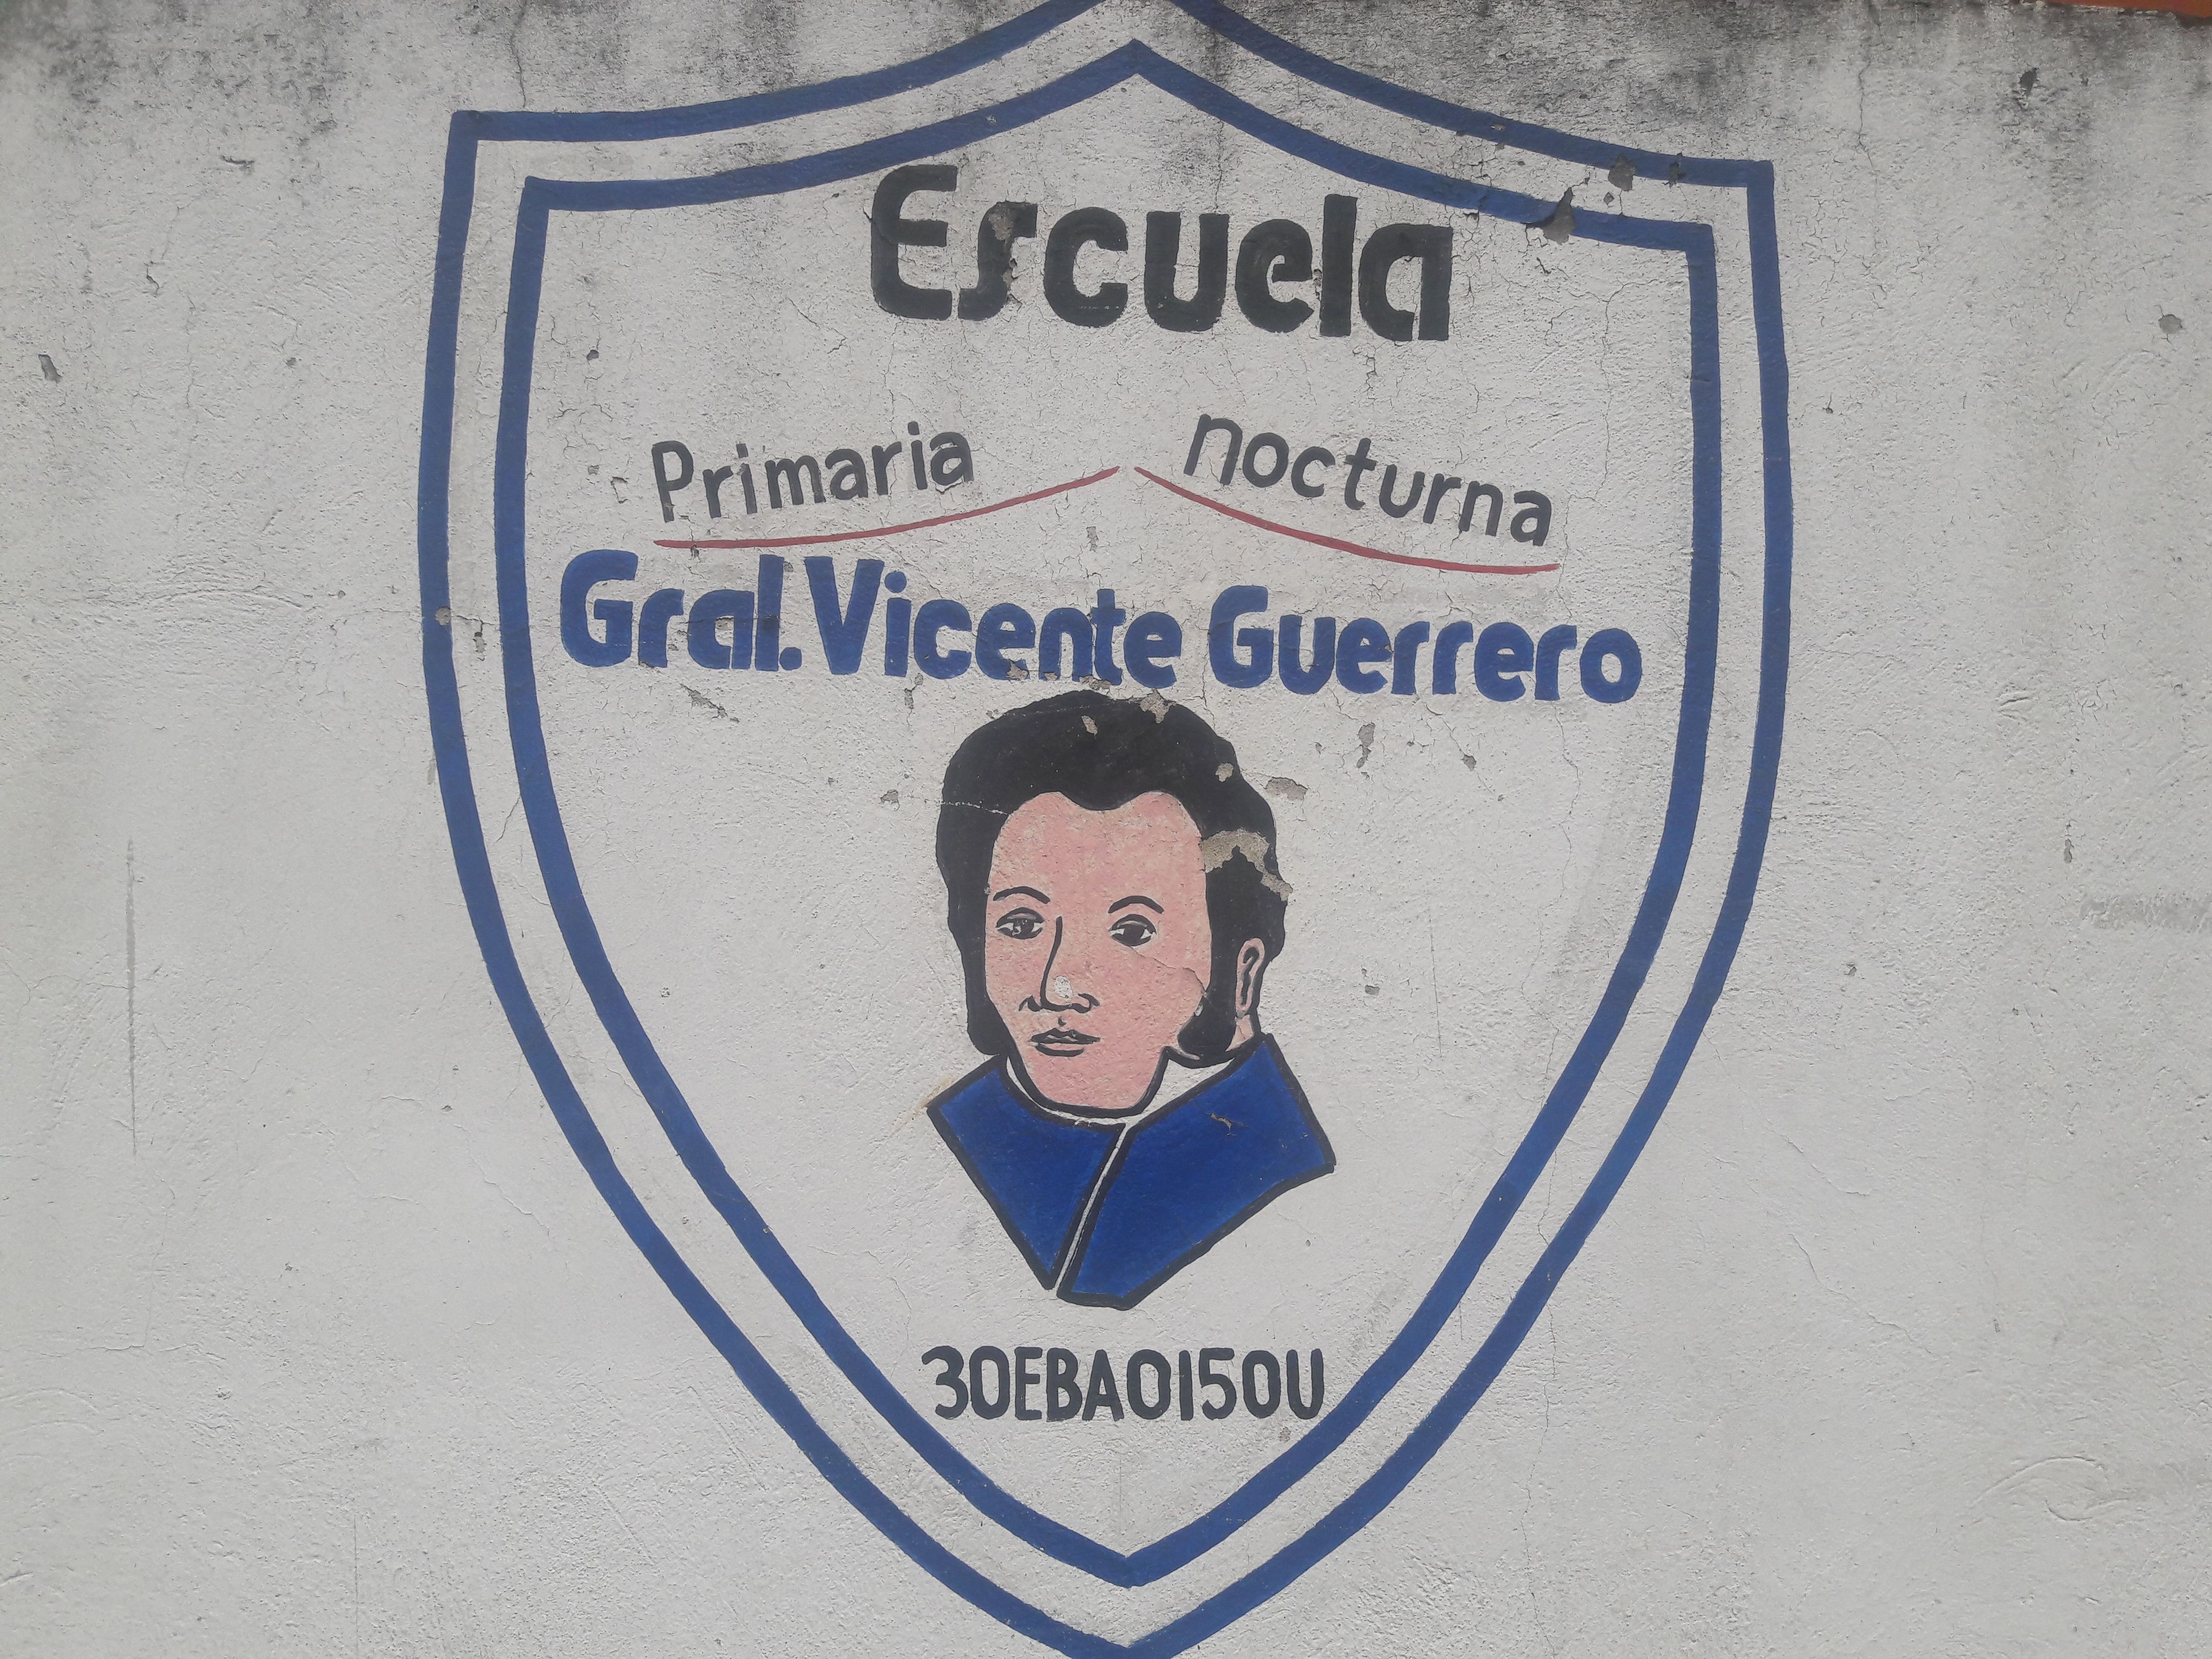 A primary school in Xalapa, named after former president Vicente Guerrero, portrays him with white skin. Image by Jonathan Custodio. Mexico, 2018.